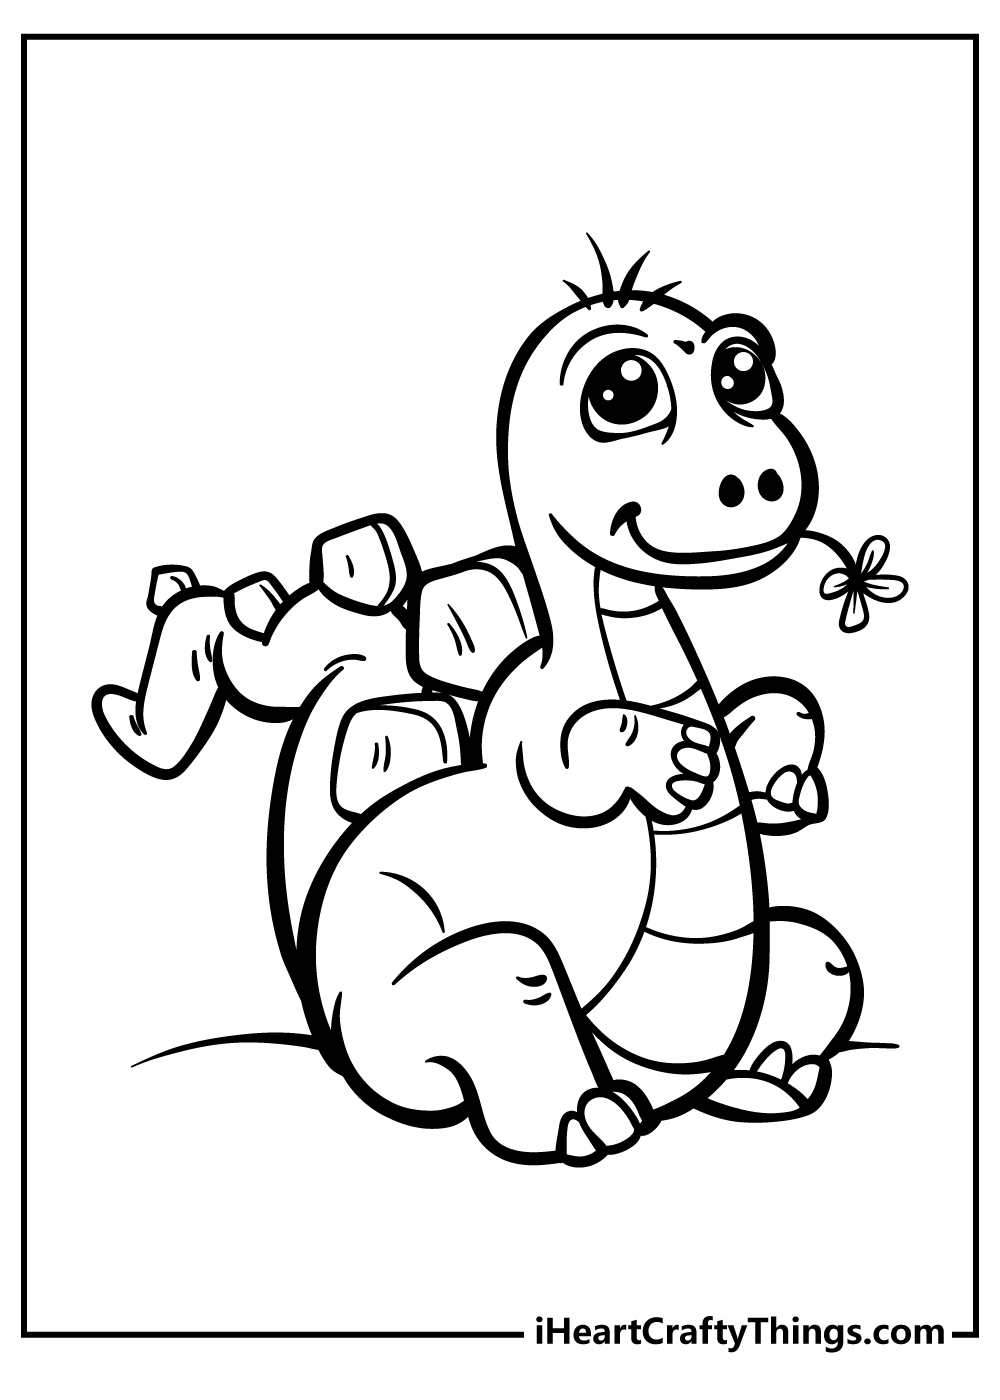 Baby Dinosaur Coloring Book for adults free download